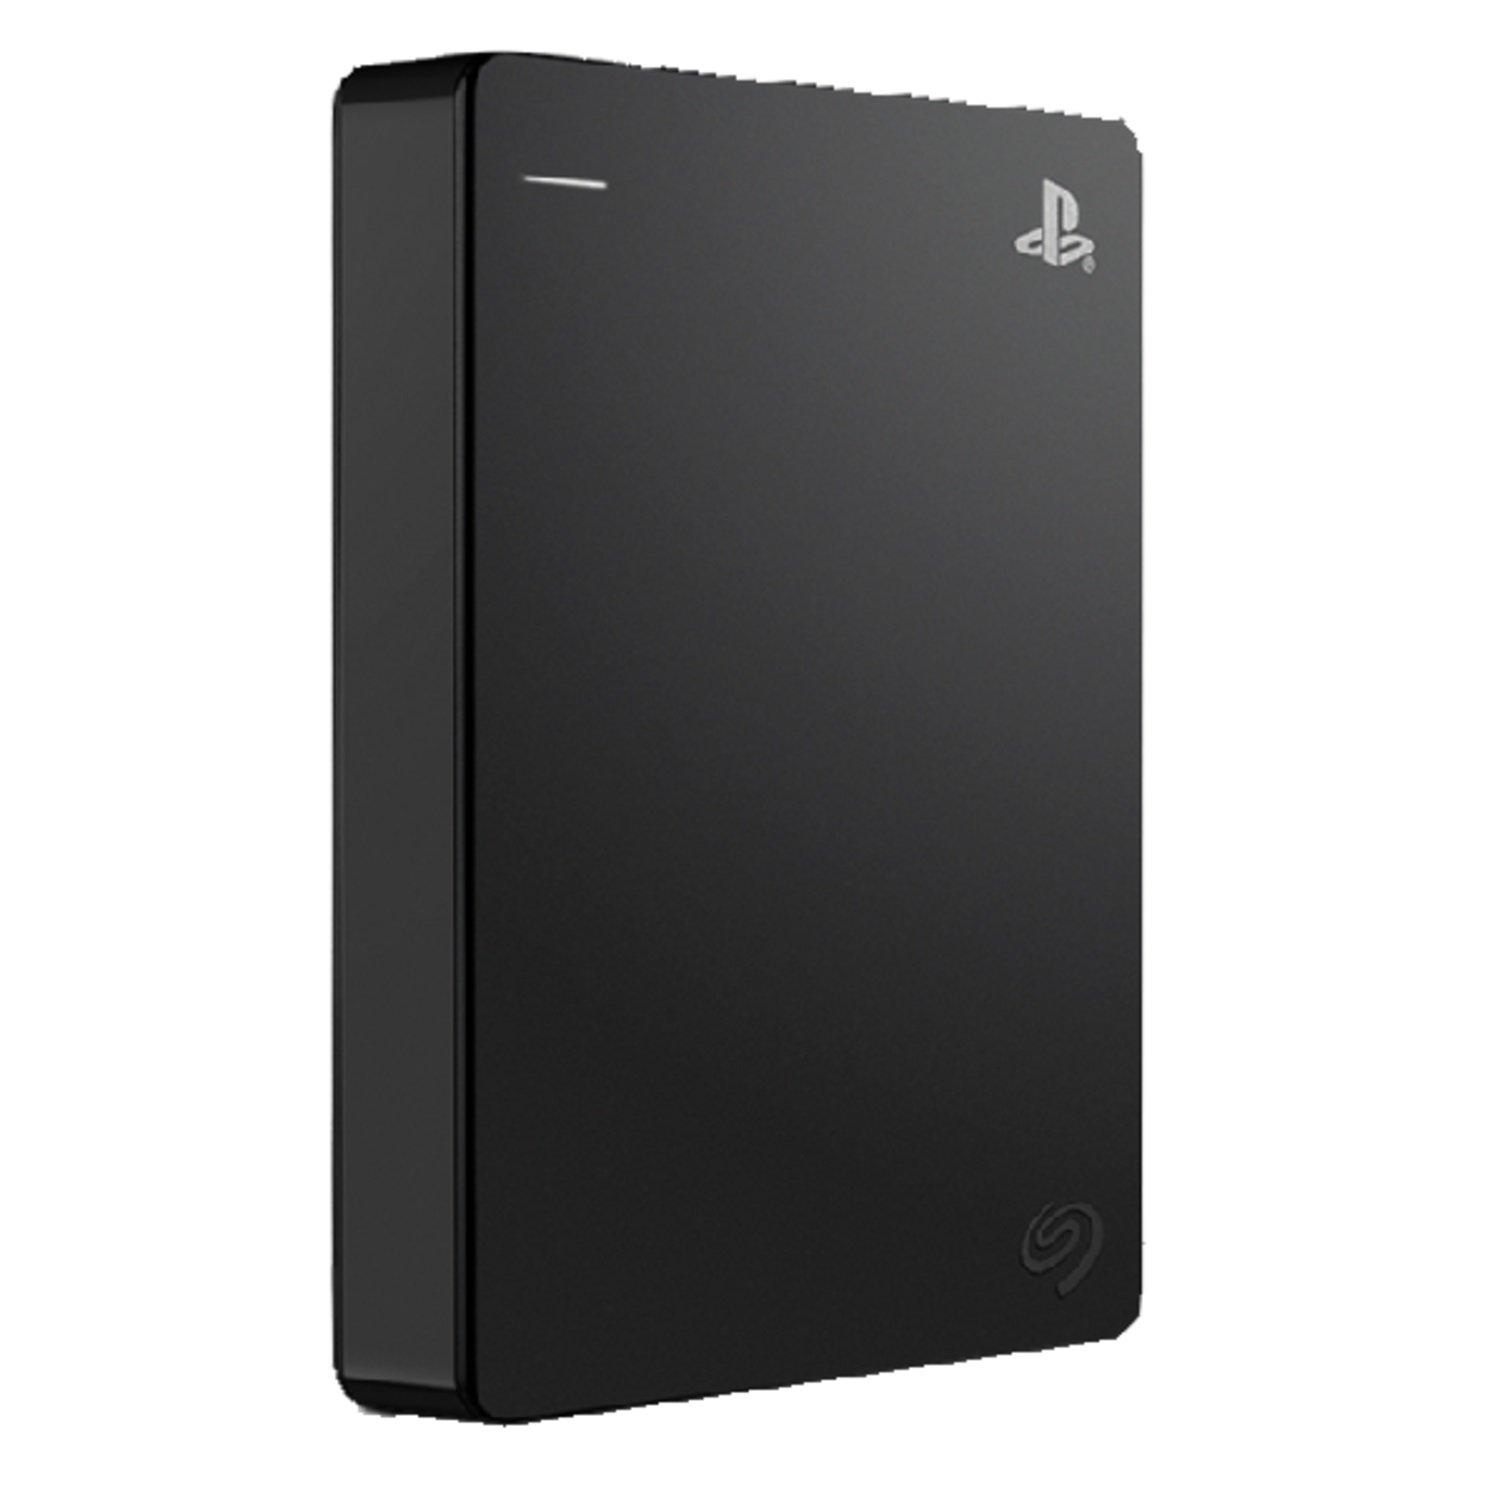 Seagate 4TB Game PlayStation External Drive Hard | GameStop for Drive